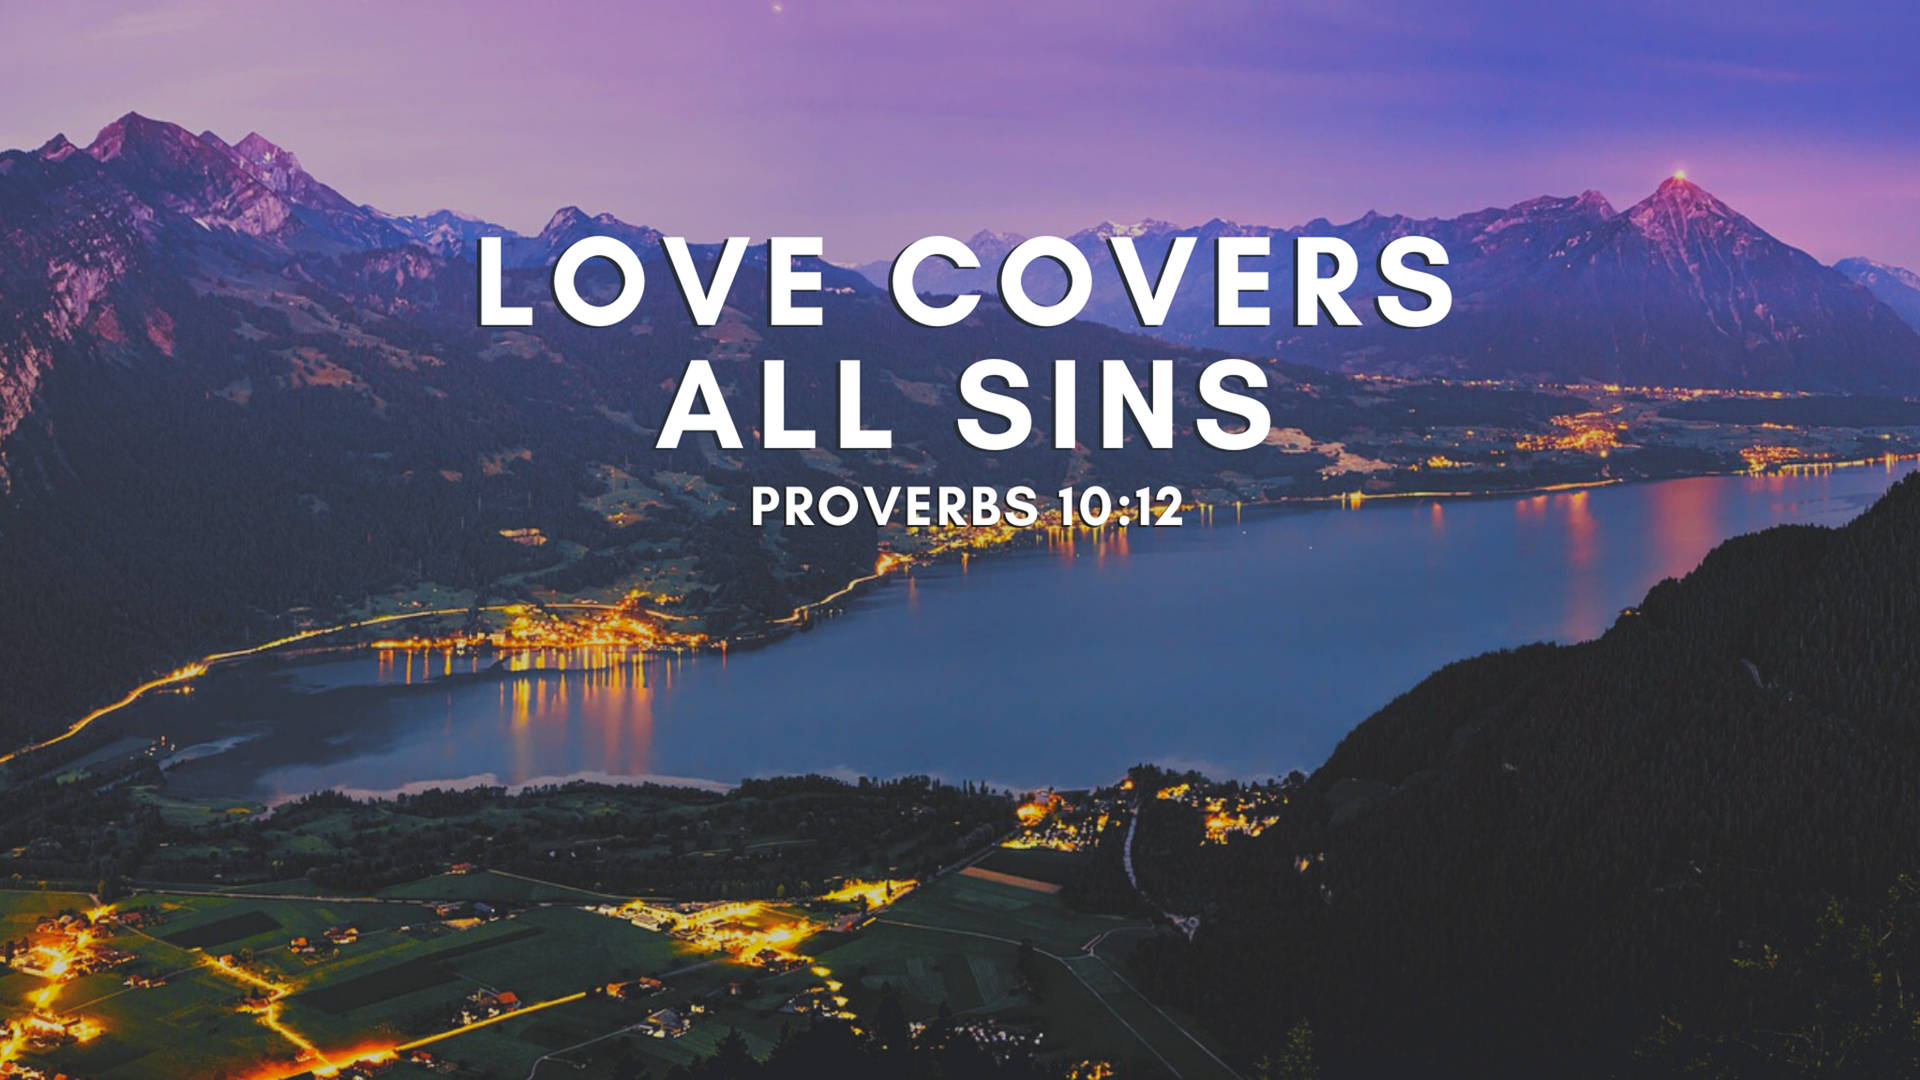 Love Covers Sins Bible Quote Wallpaper